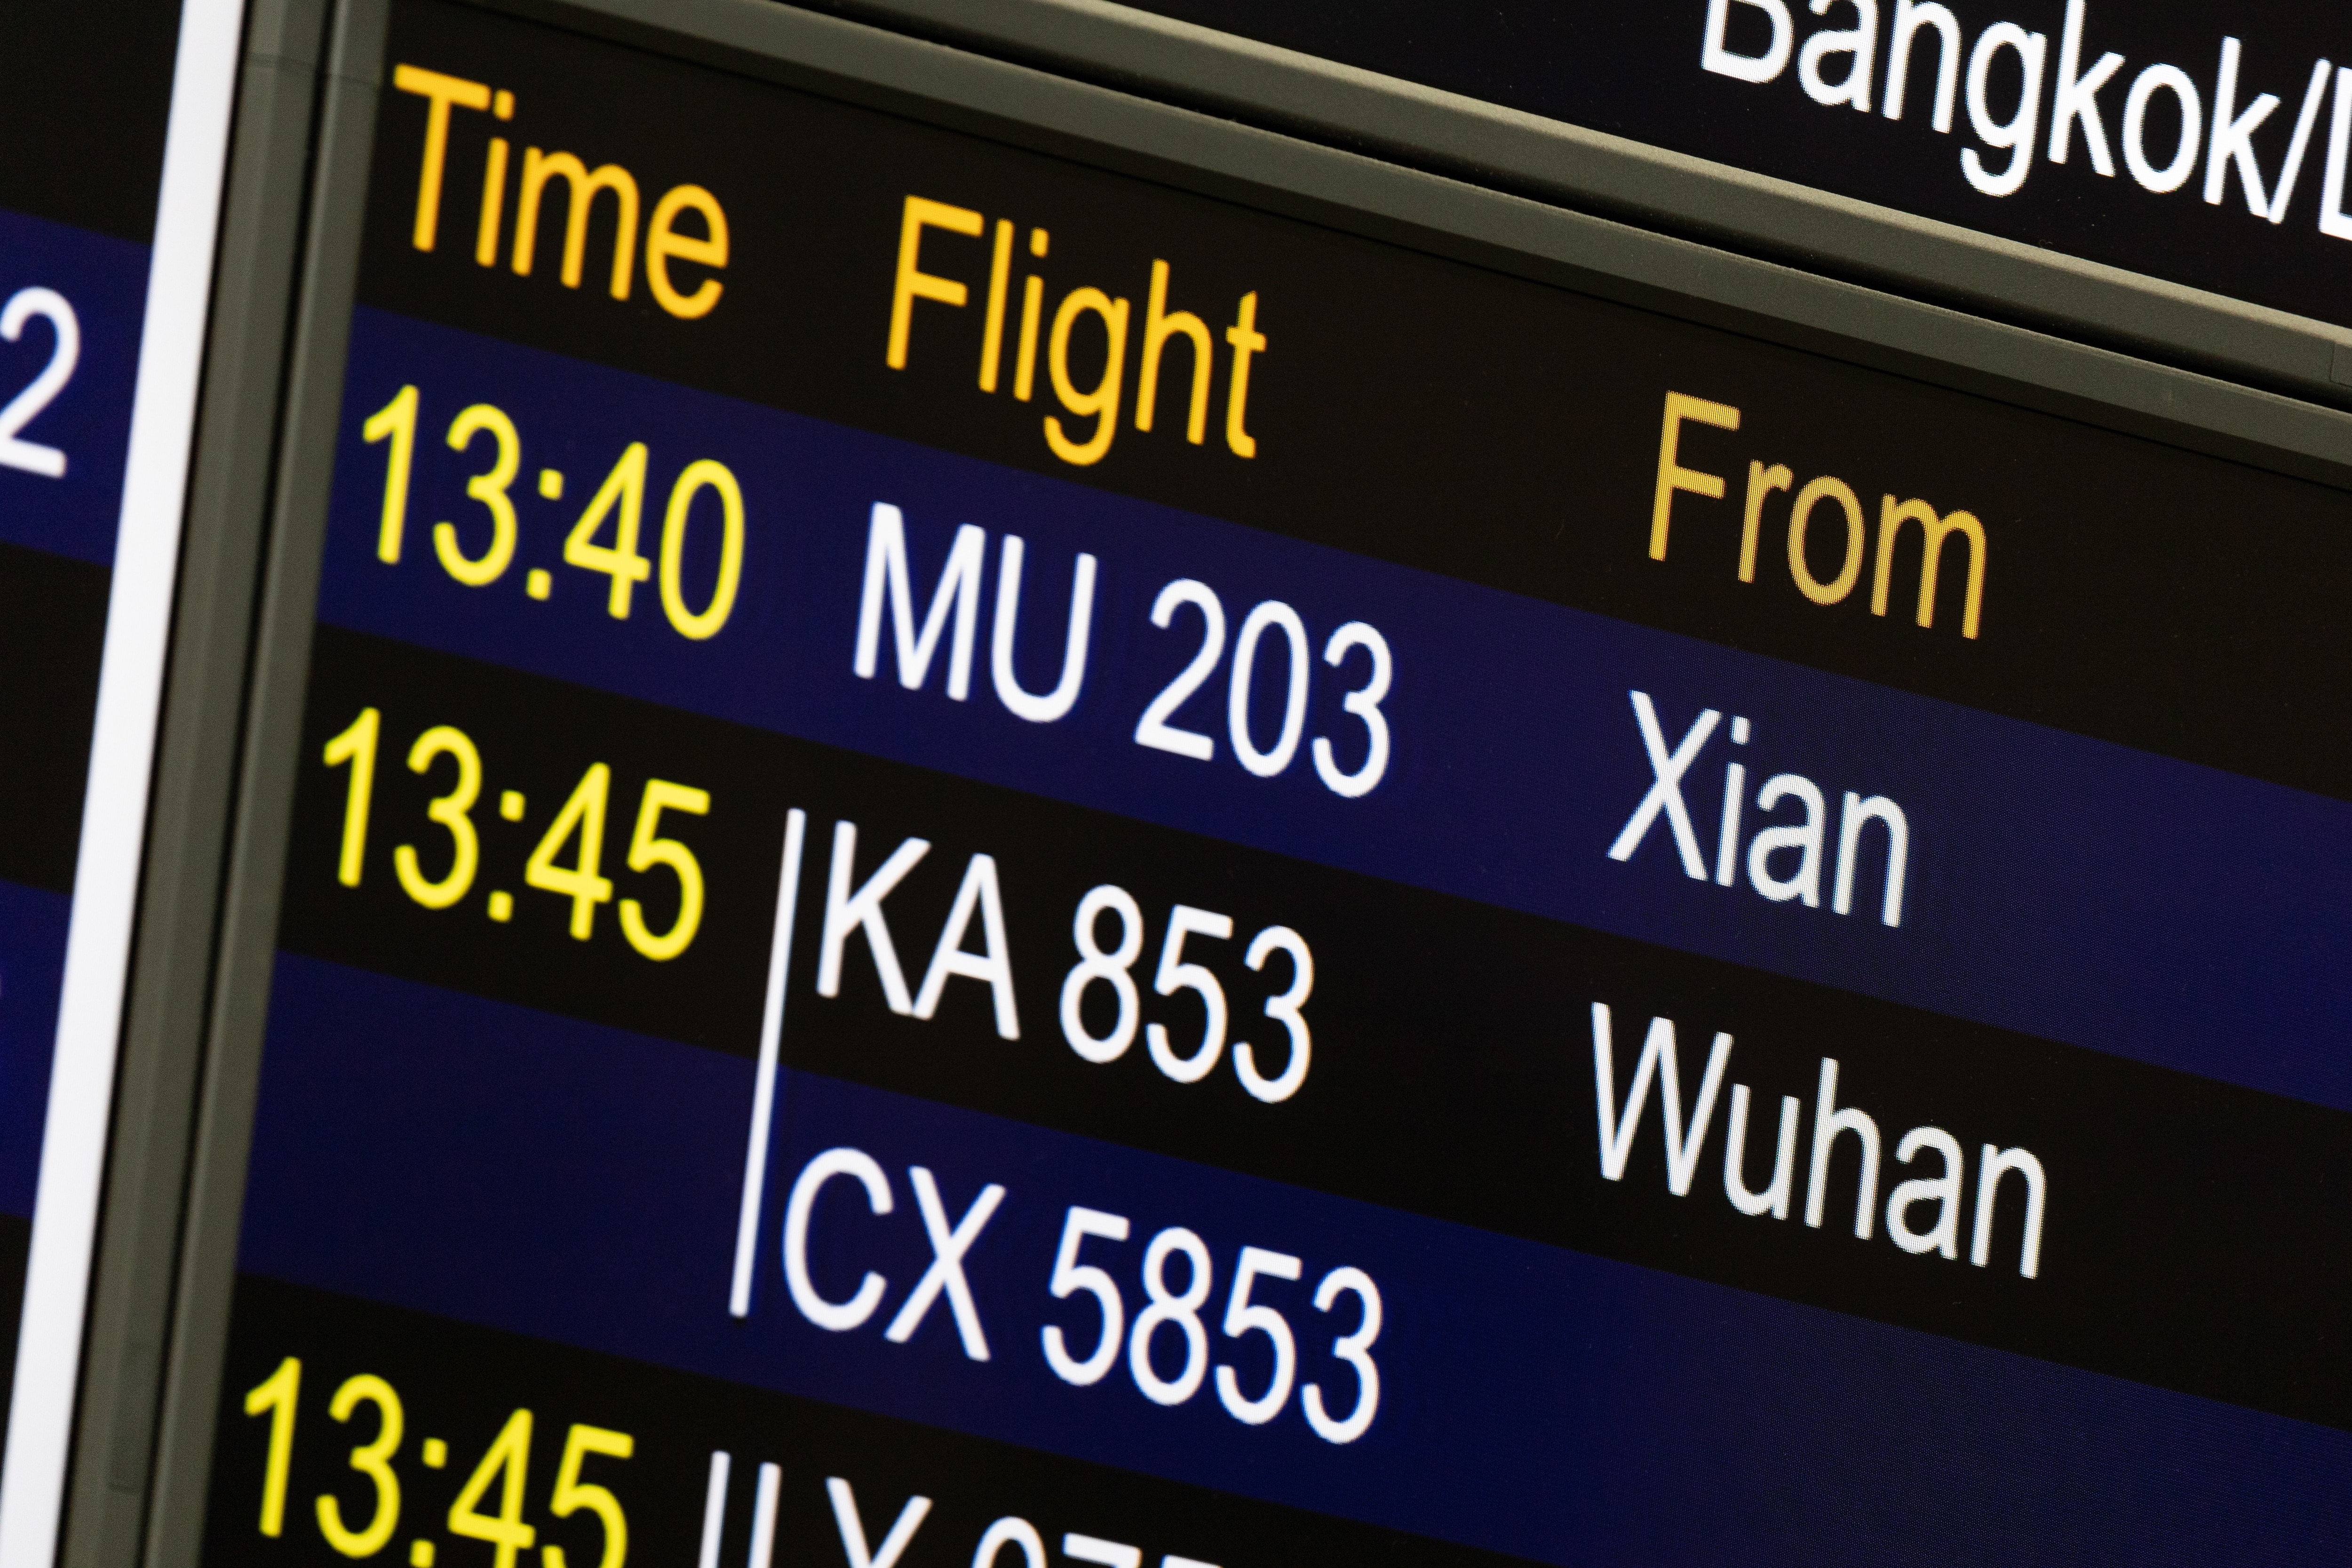 Flights and trains out of Wuhan were halted as part of the Chinese crackdown. 